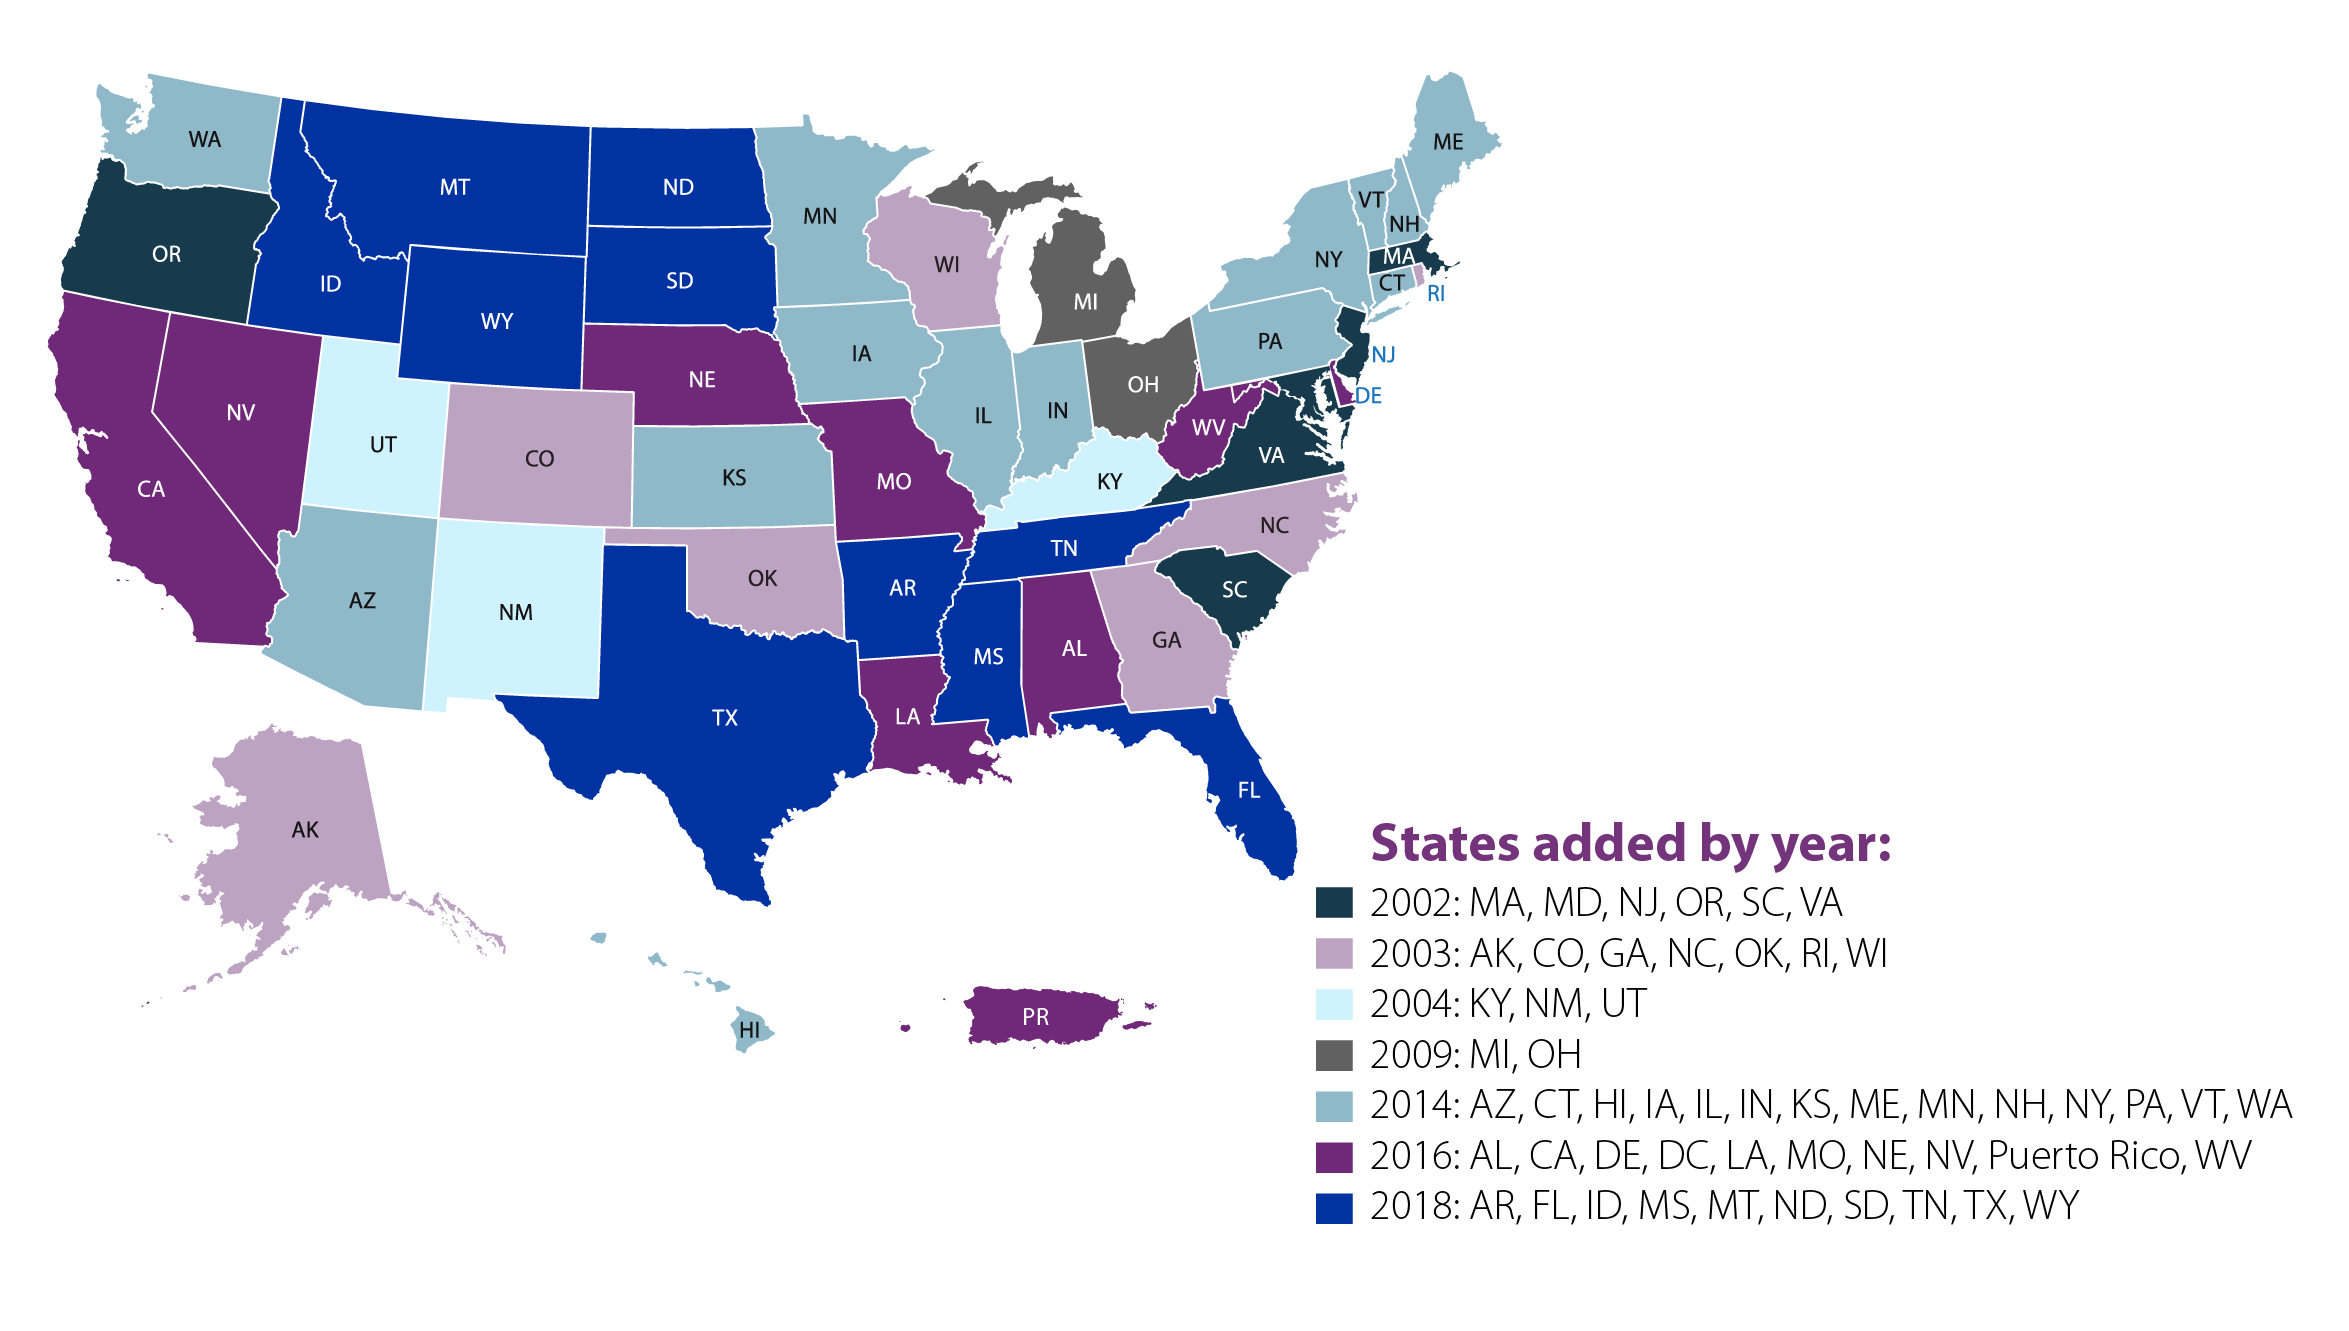 Map depicting the year each state was added to the NVDRS program.